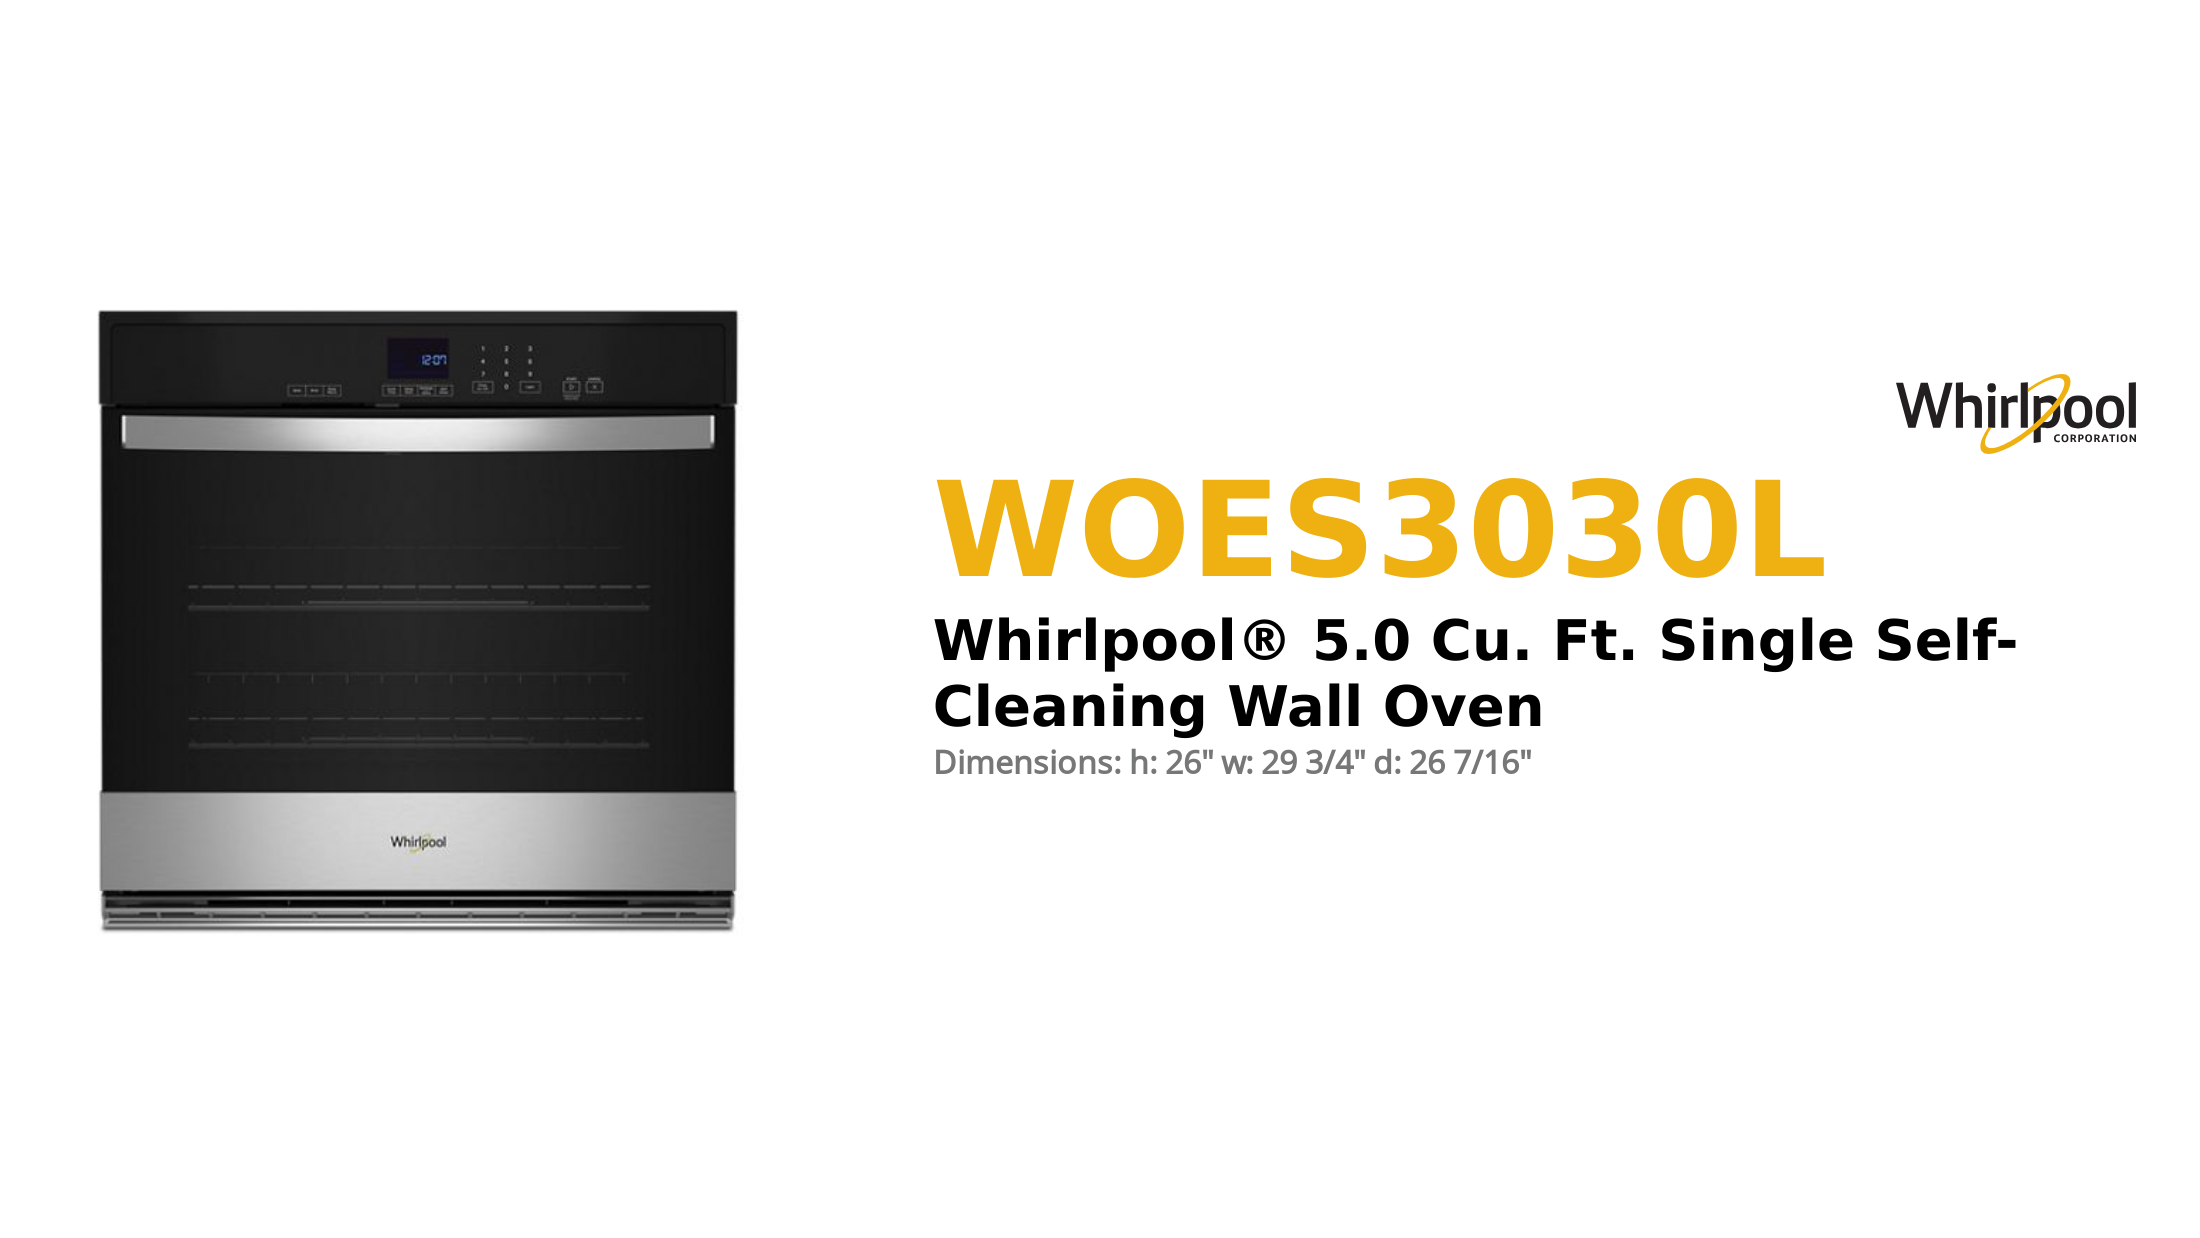 



WHIRLPOOL® 5.0 CU. FT. SINGLE SELF-CLEANING WALL OVEN



